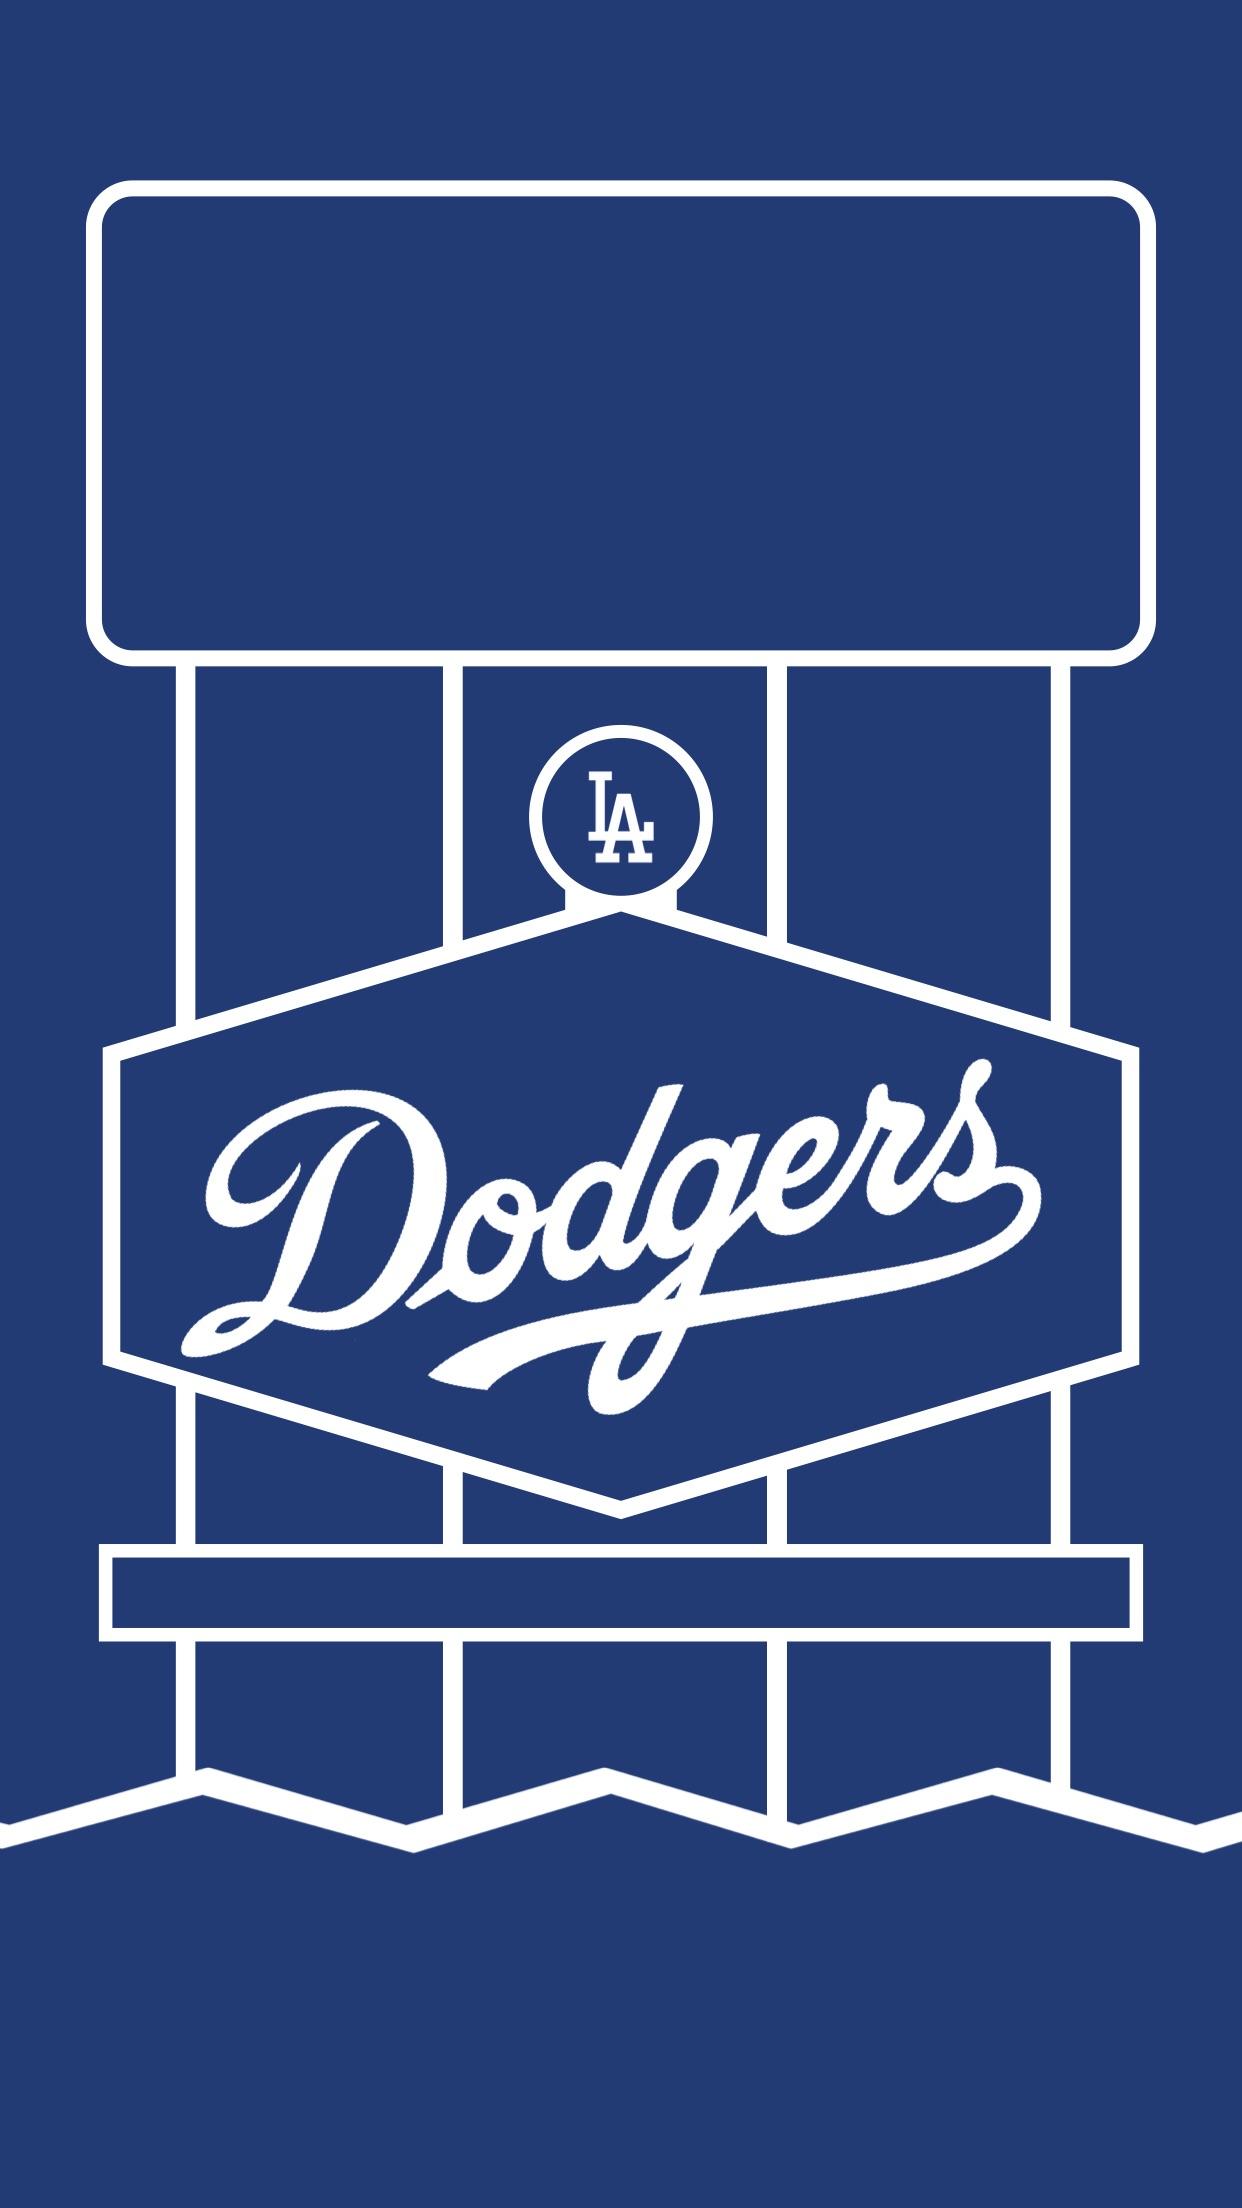 minimal dodger iPhone wallpaper I made! The time and date fit perfectly in the lights rectangle: Dodgers